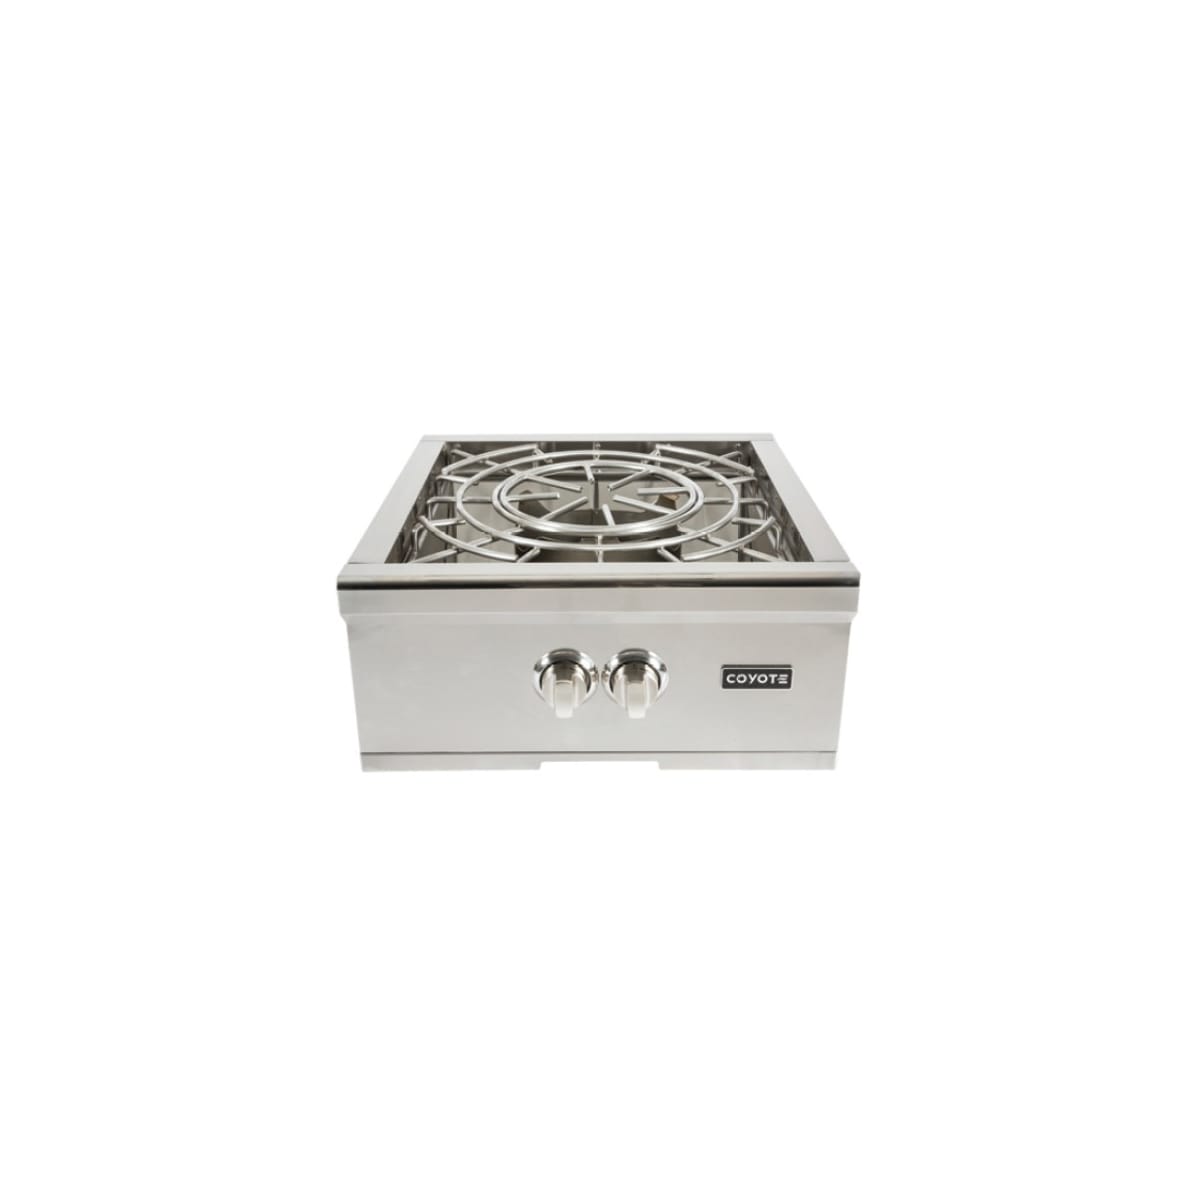 Coyote Outdoor Power Natural Gas Burner in Stainless Steel